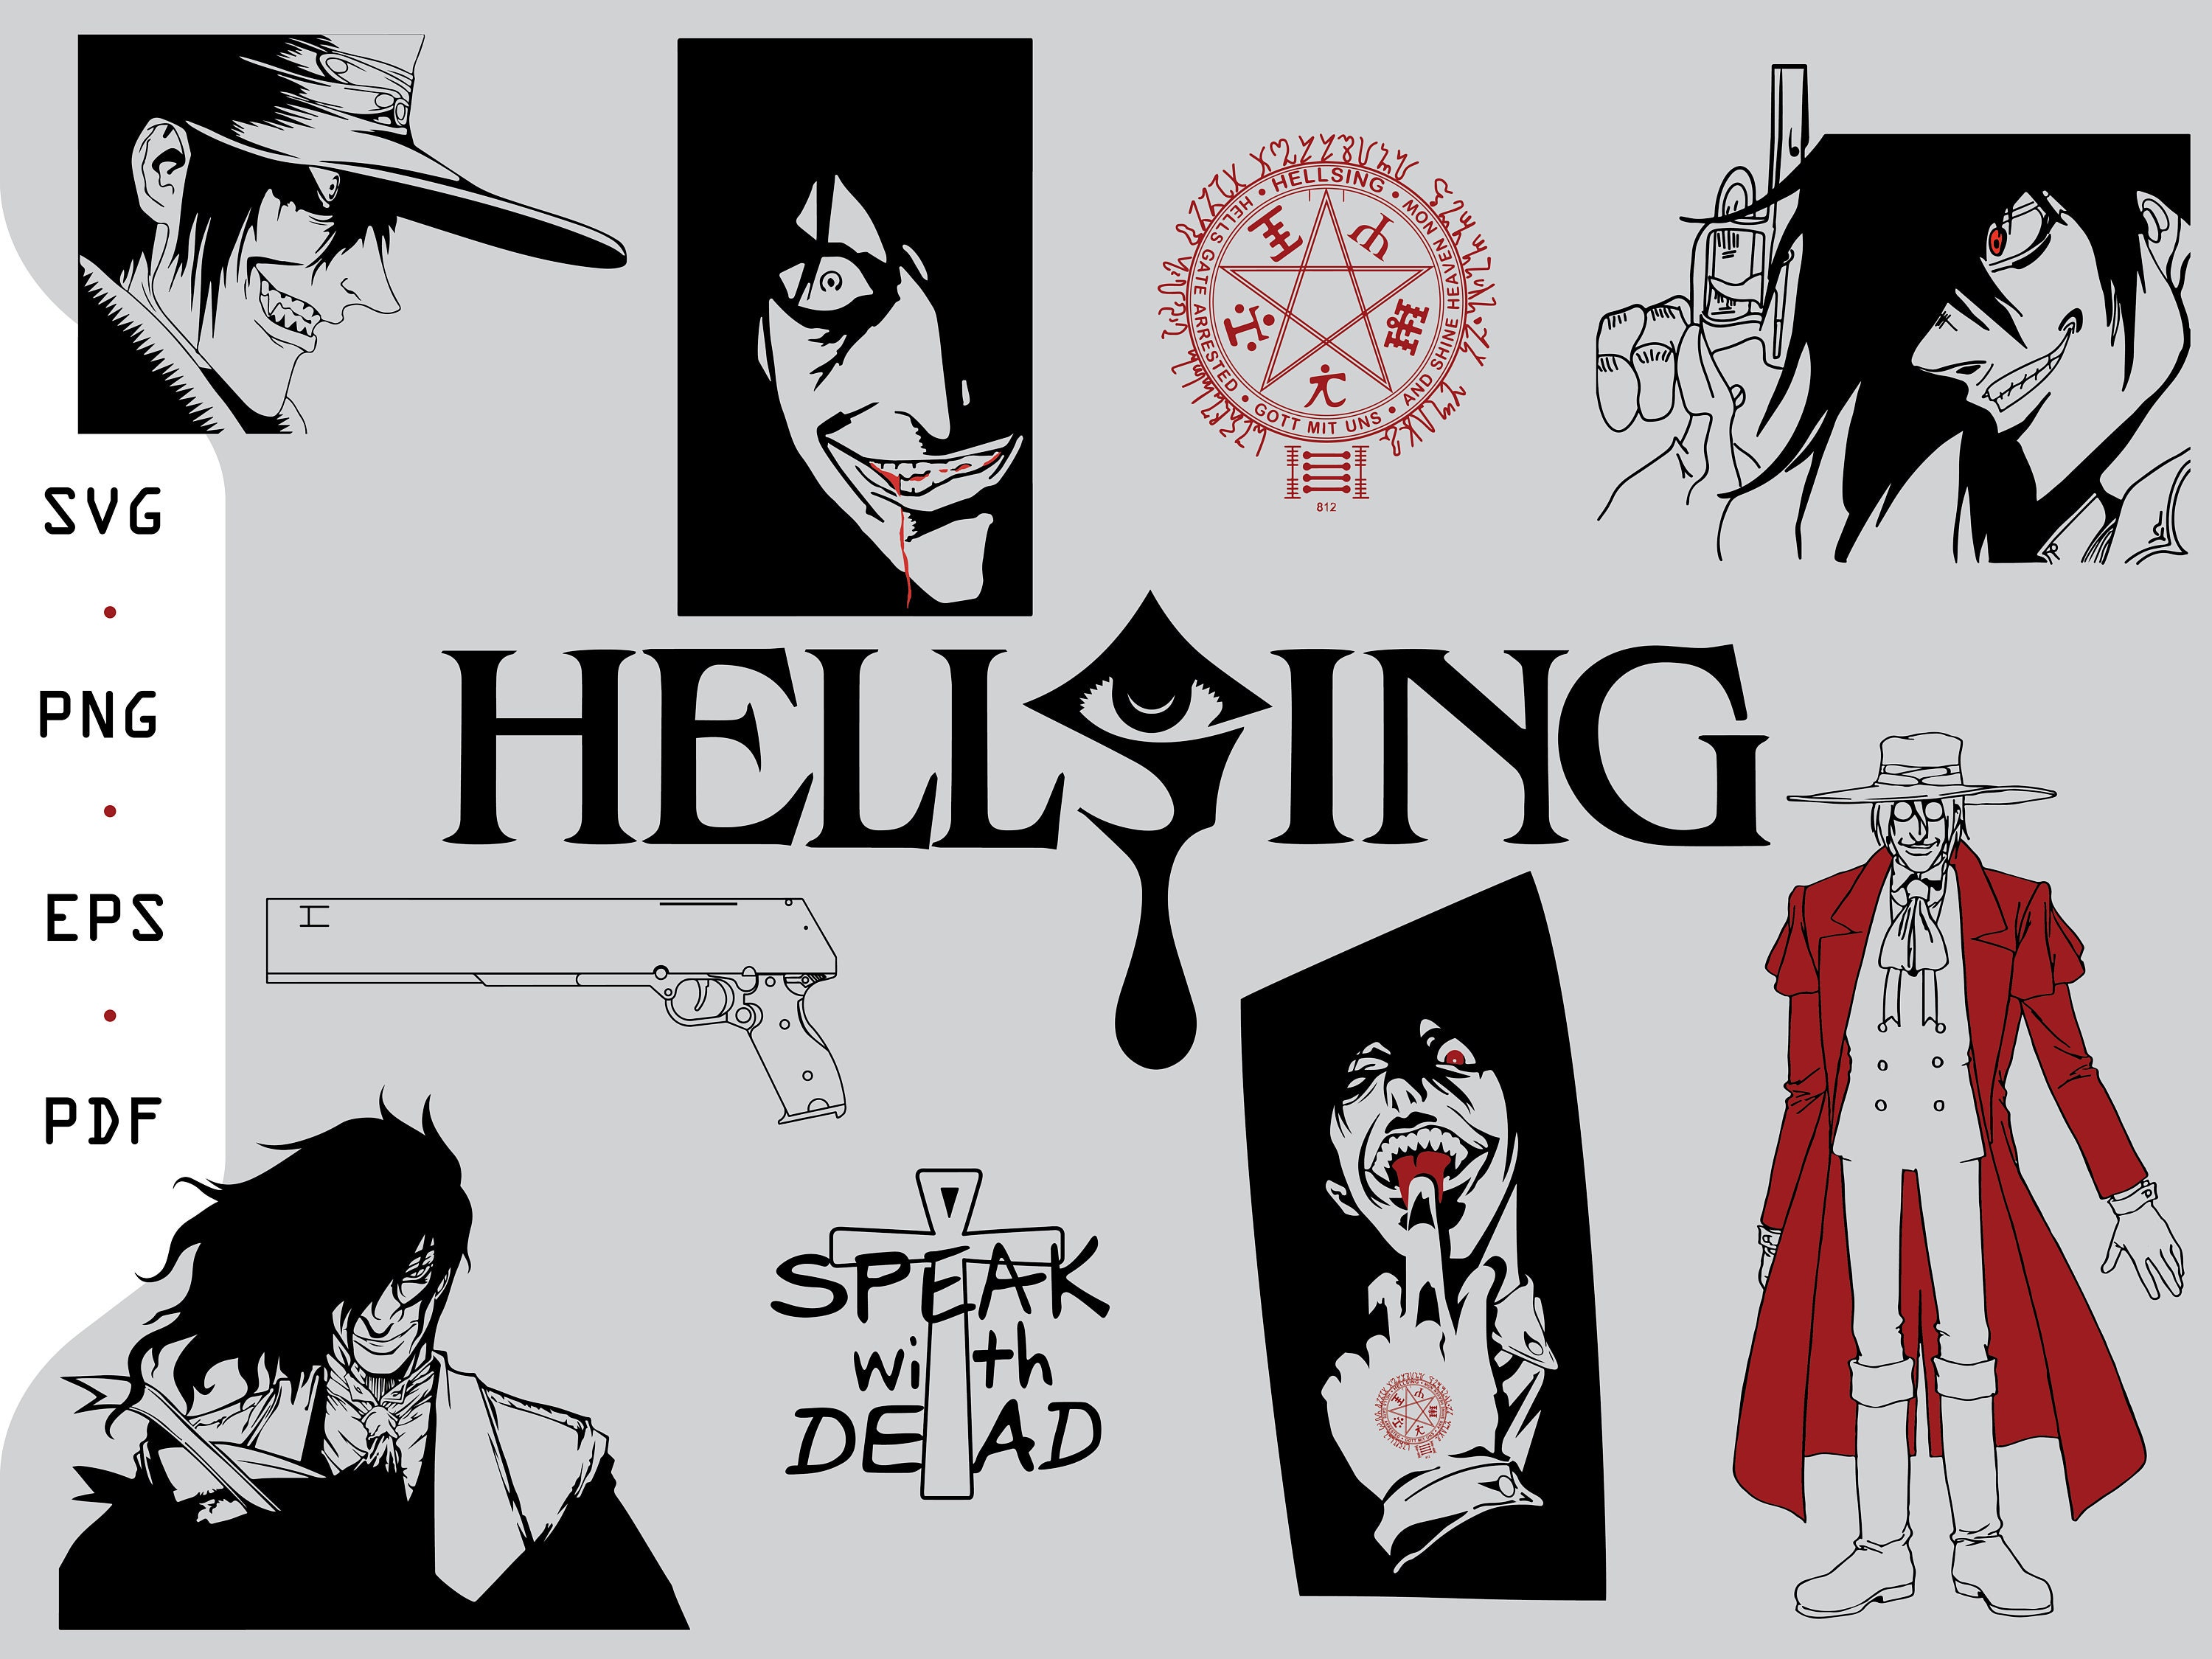 Hellsing Alucard Anime Dictionary Art Print Poster Picture Book